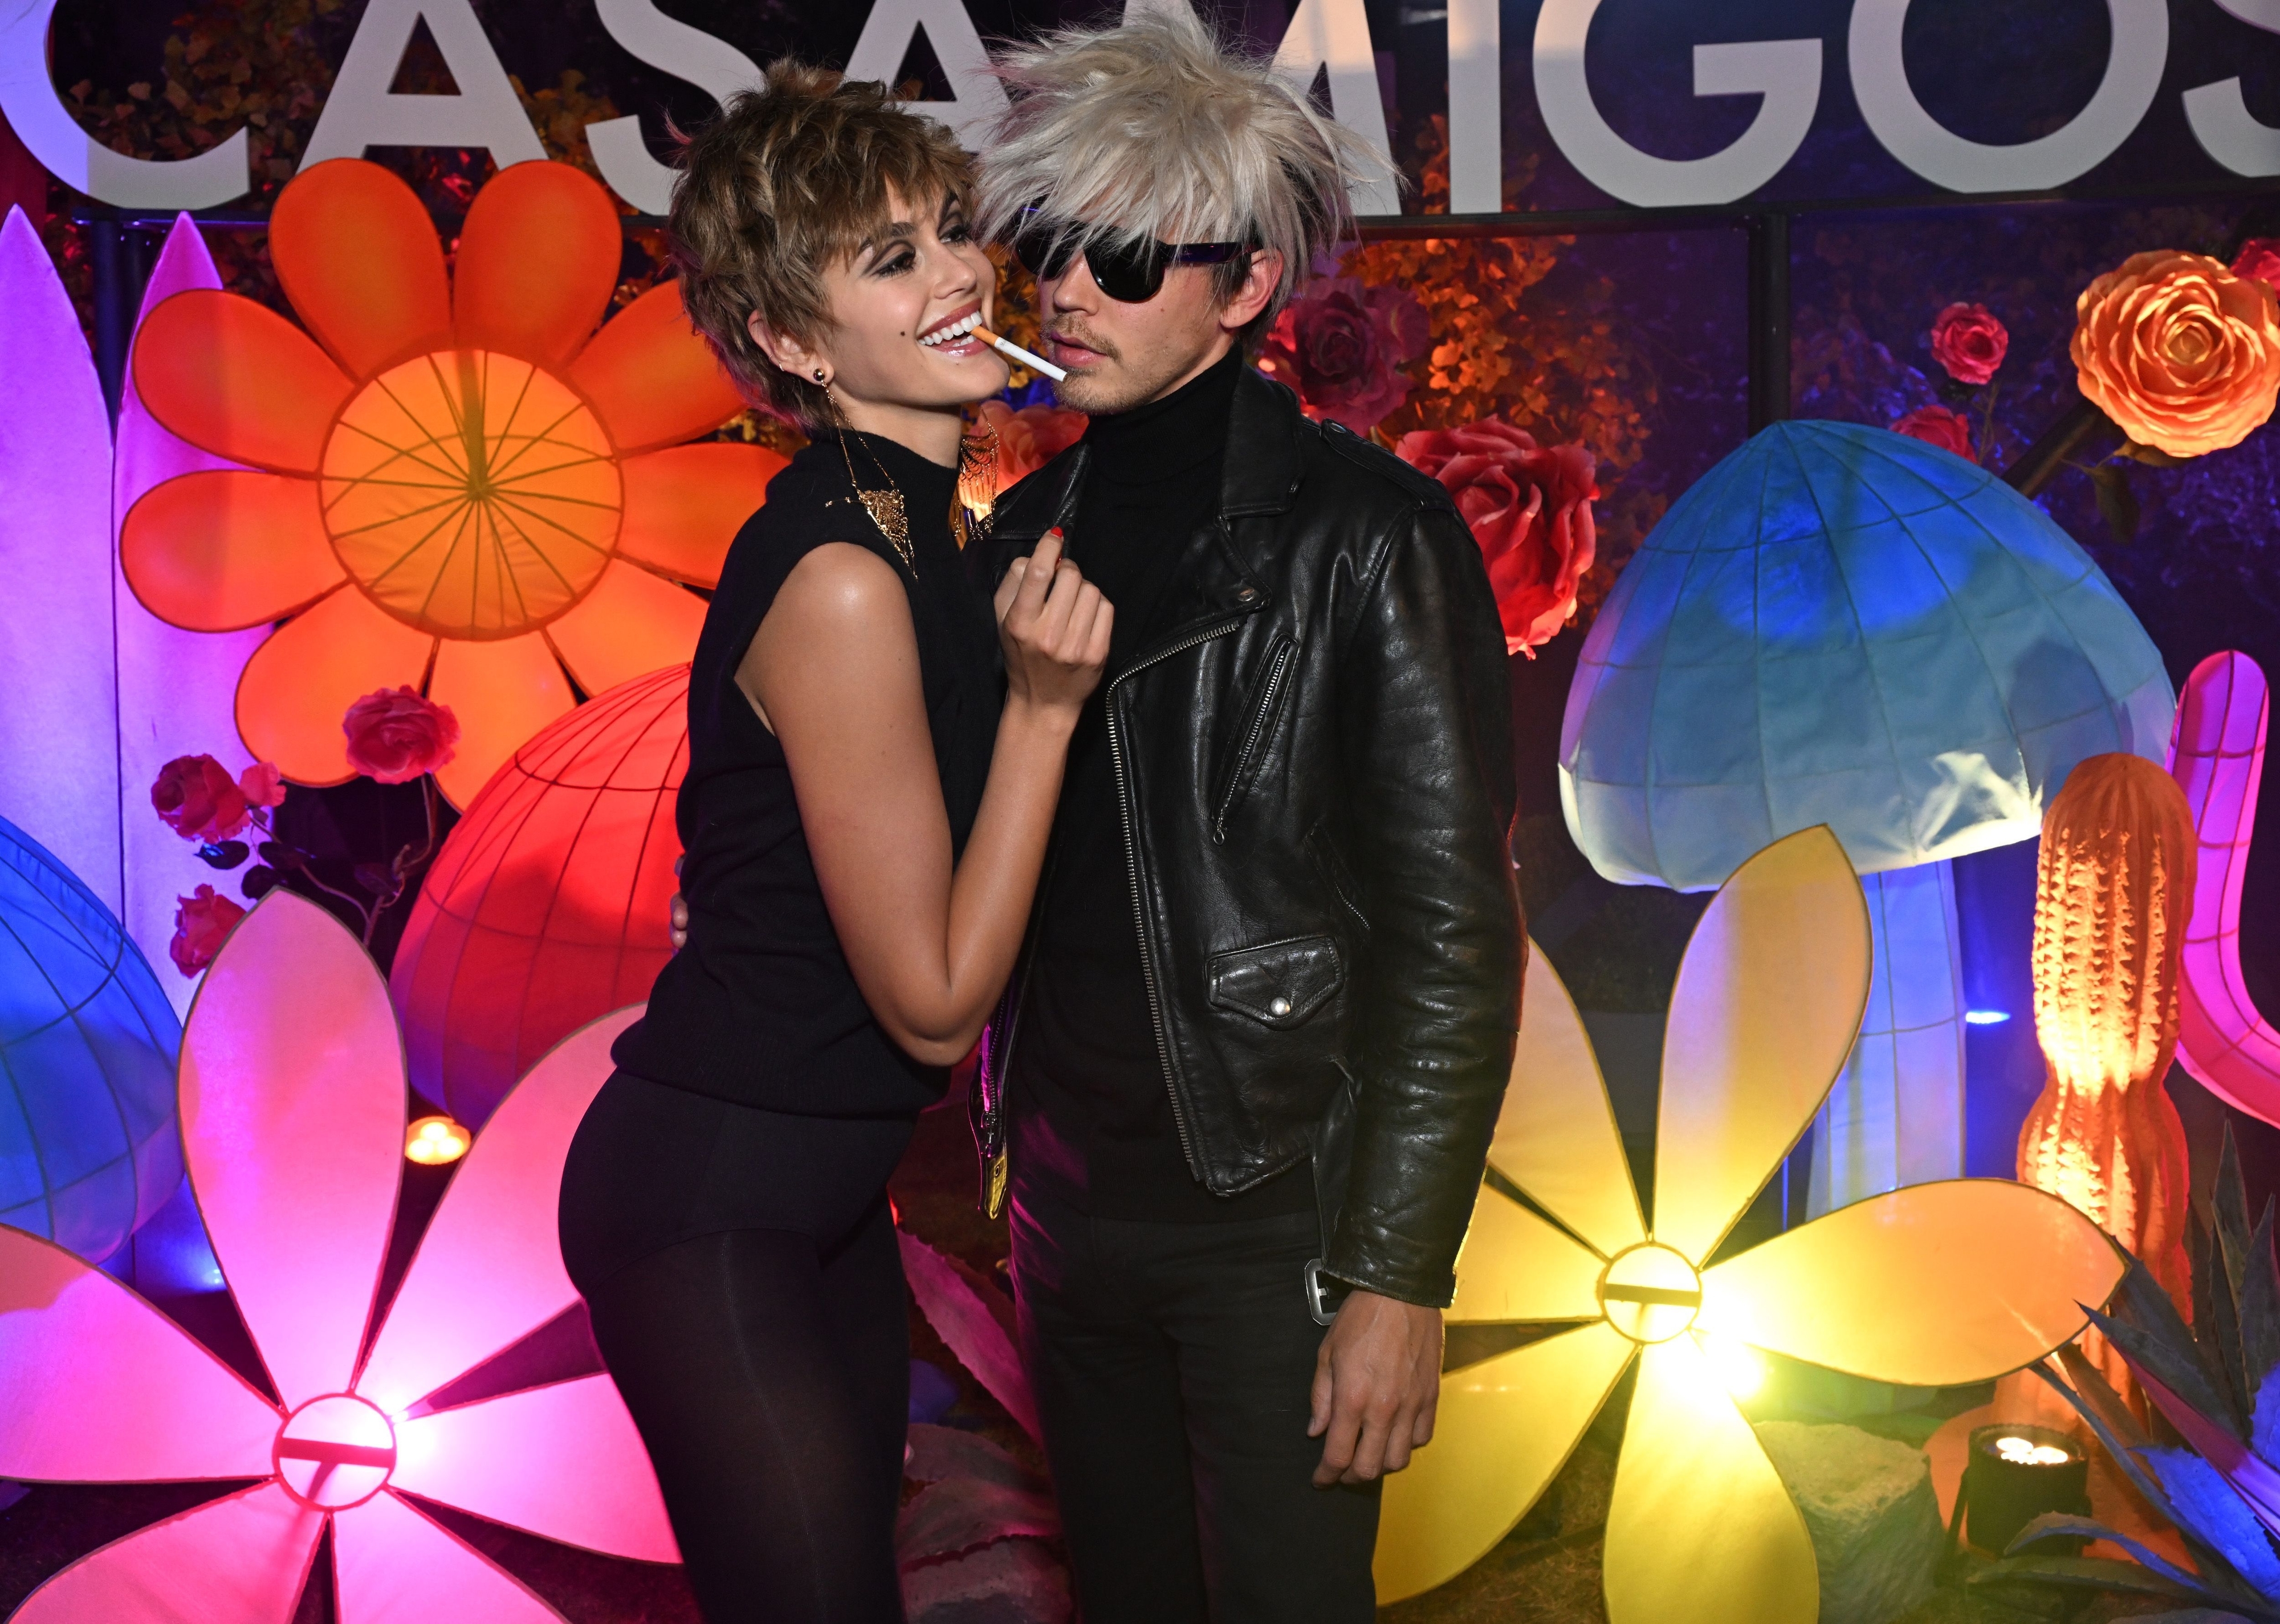 Kaia Gerber and Austin Butler in costume